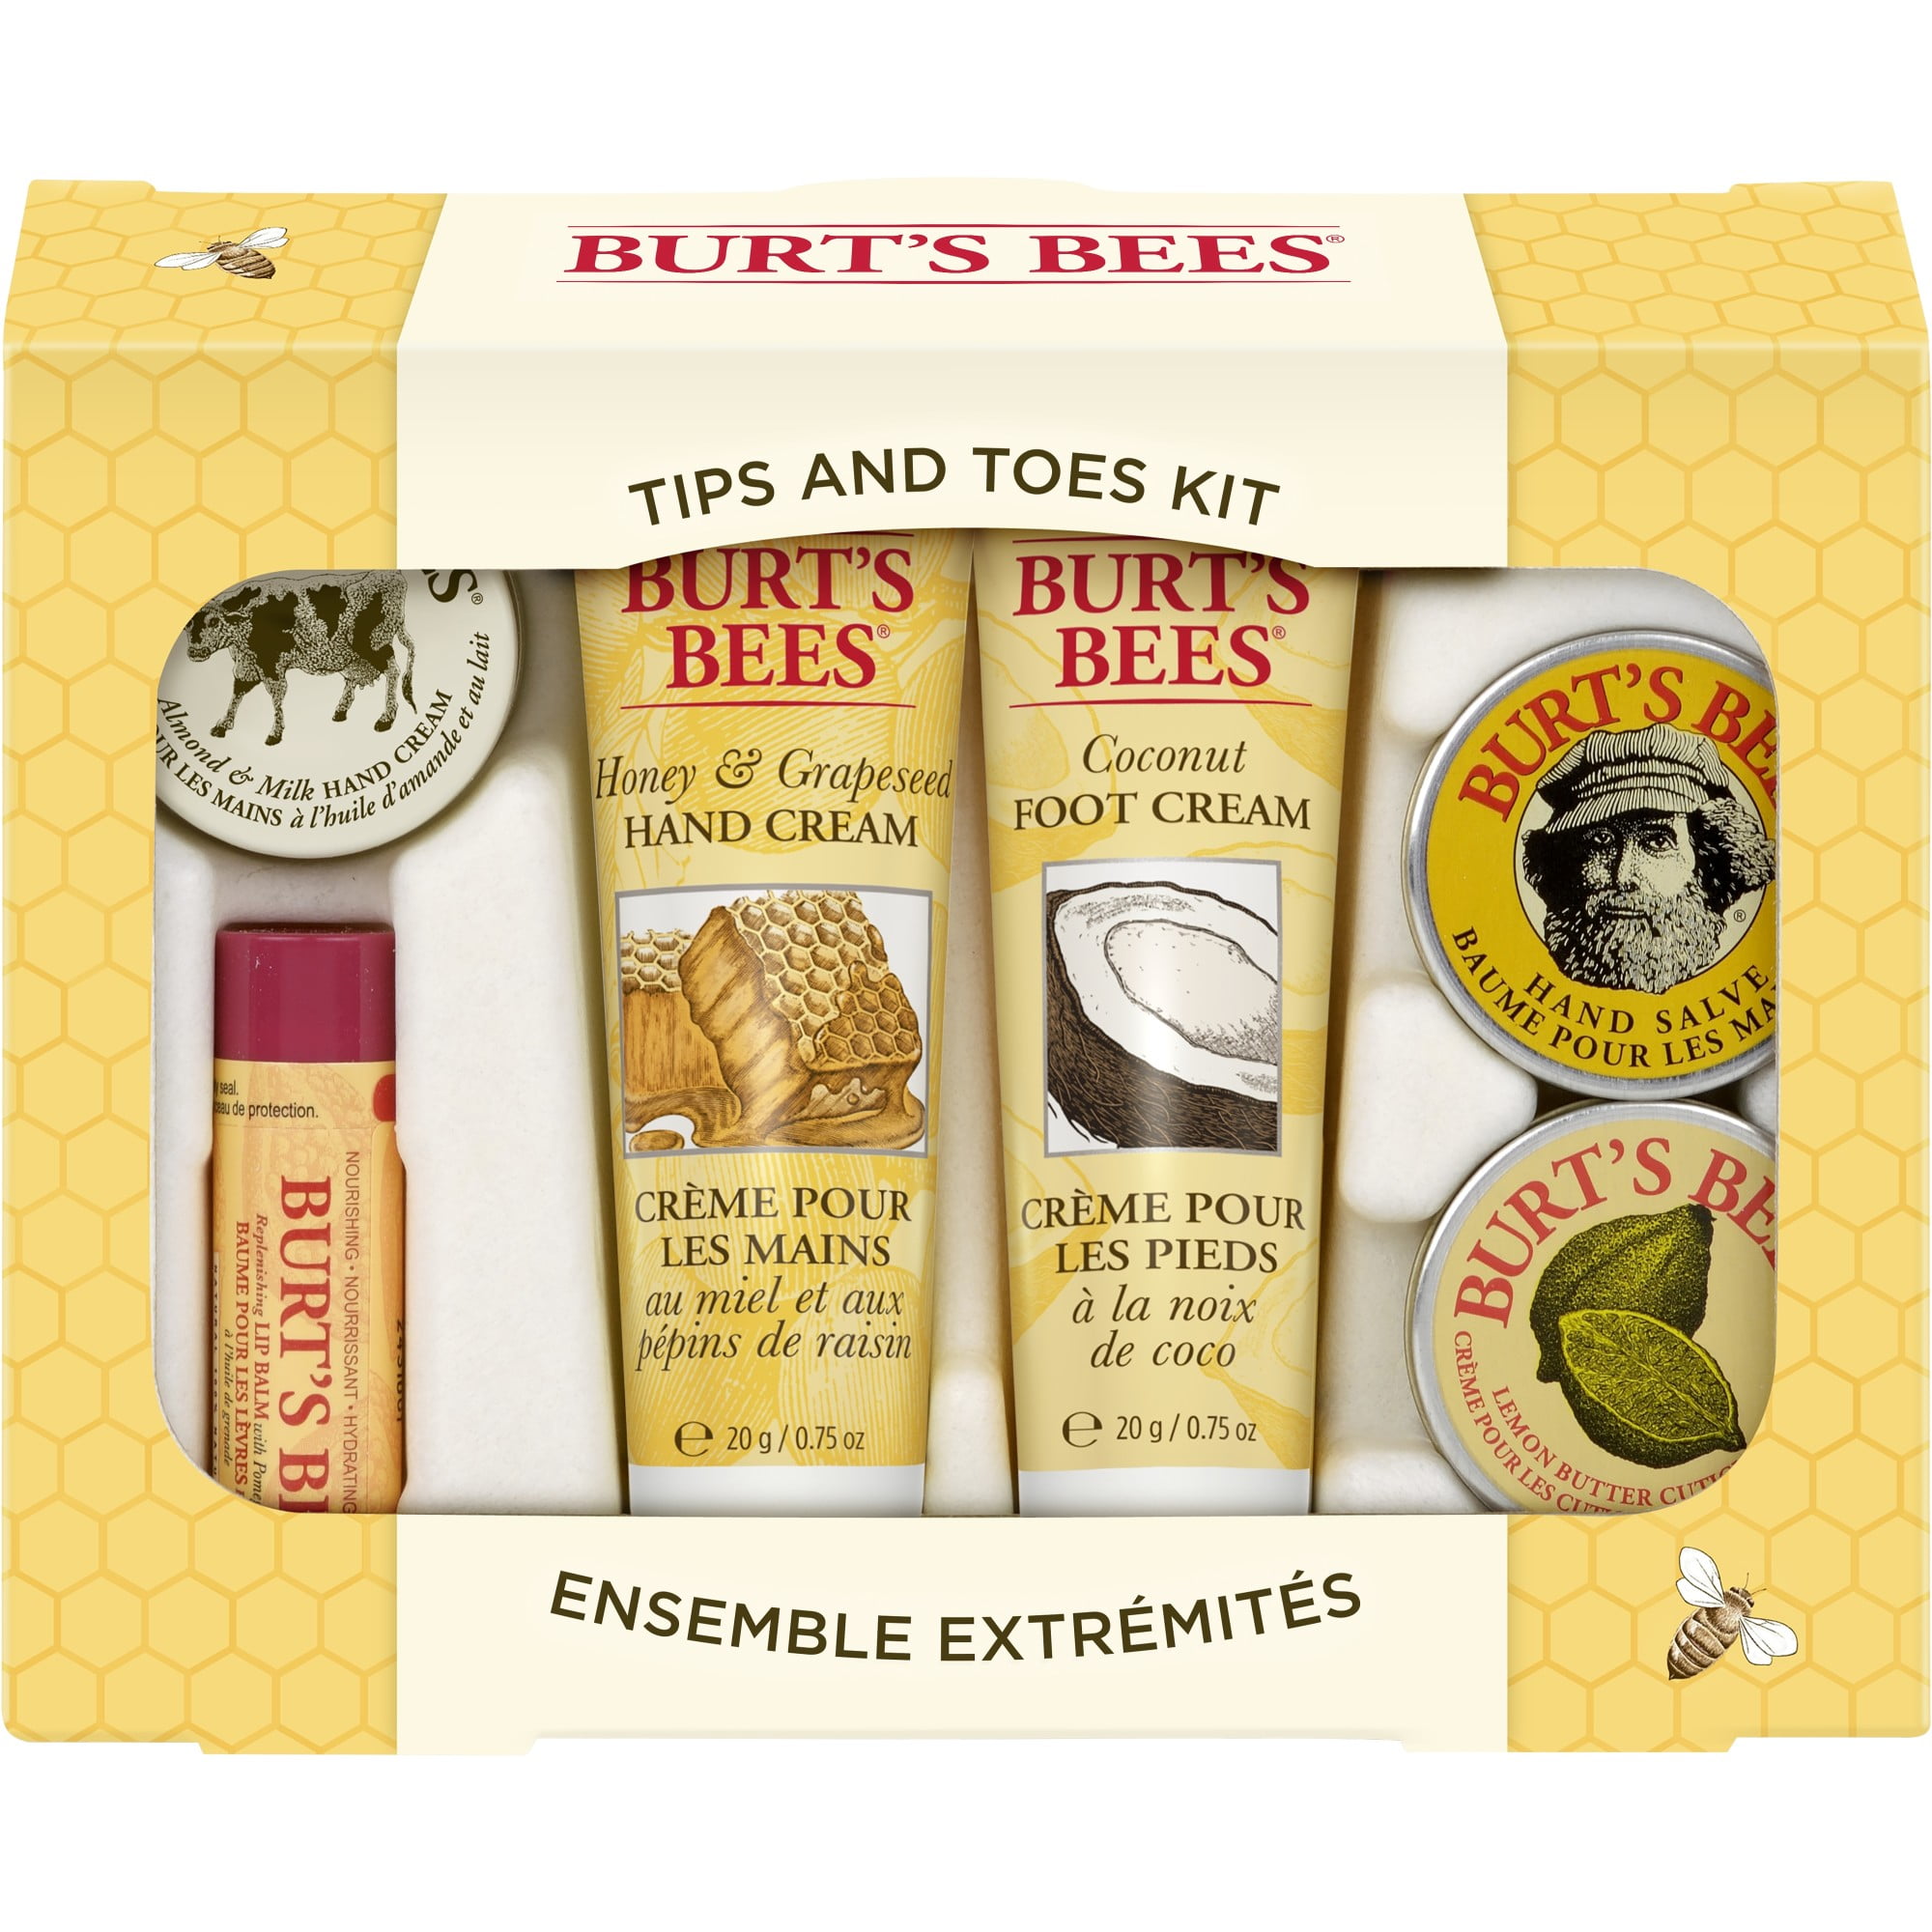 noedels ticket duidelijk Burt's Bees Tips and Toes Gift Set, 6 Travel Size Products in Gift Box - 2  Hand Creams, Foot Cream, Cuticle Cream, Hand Salve and Lip Balm -  Walmart.com